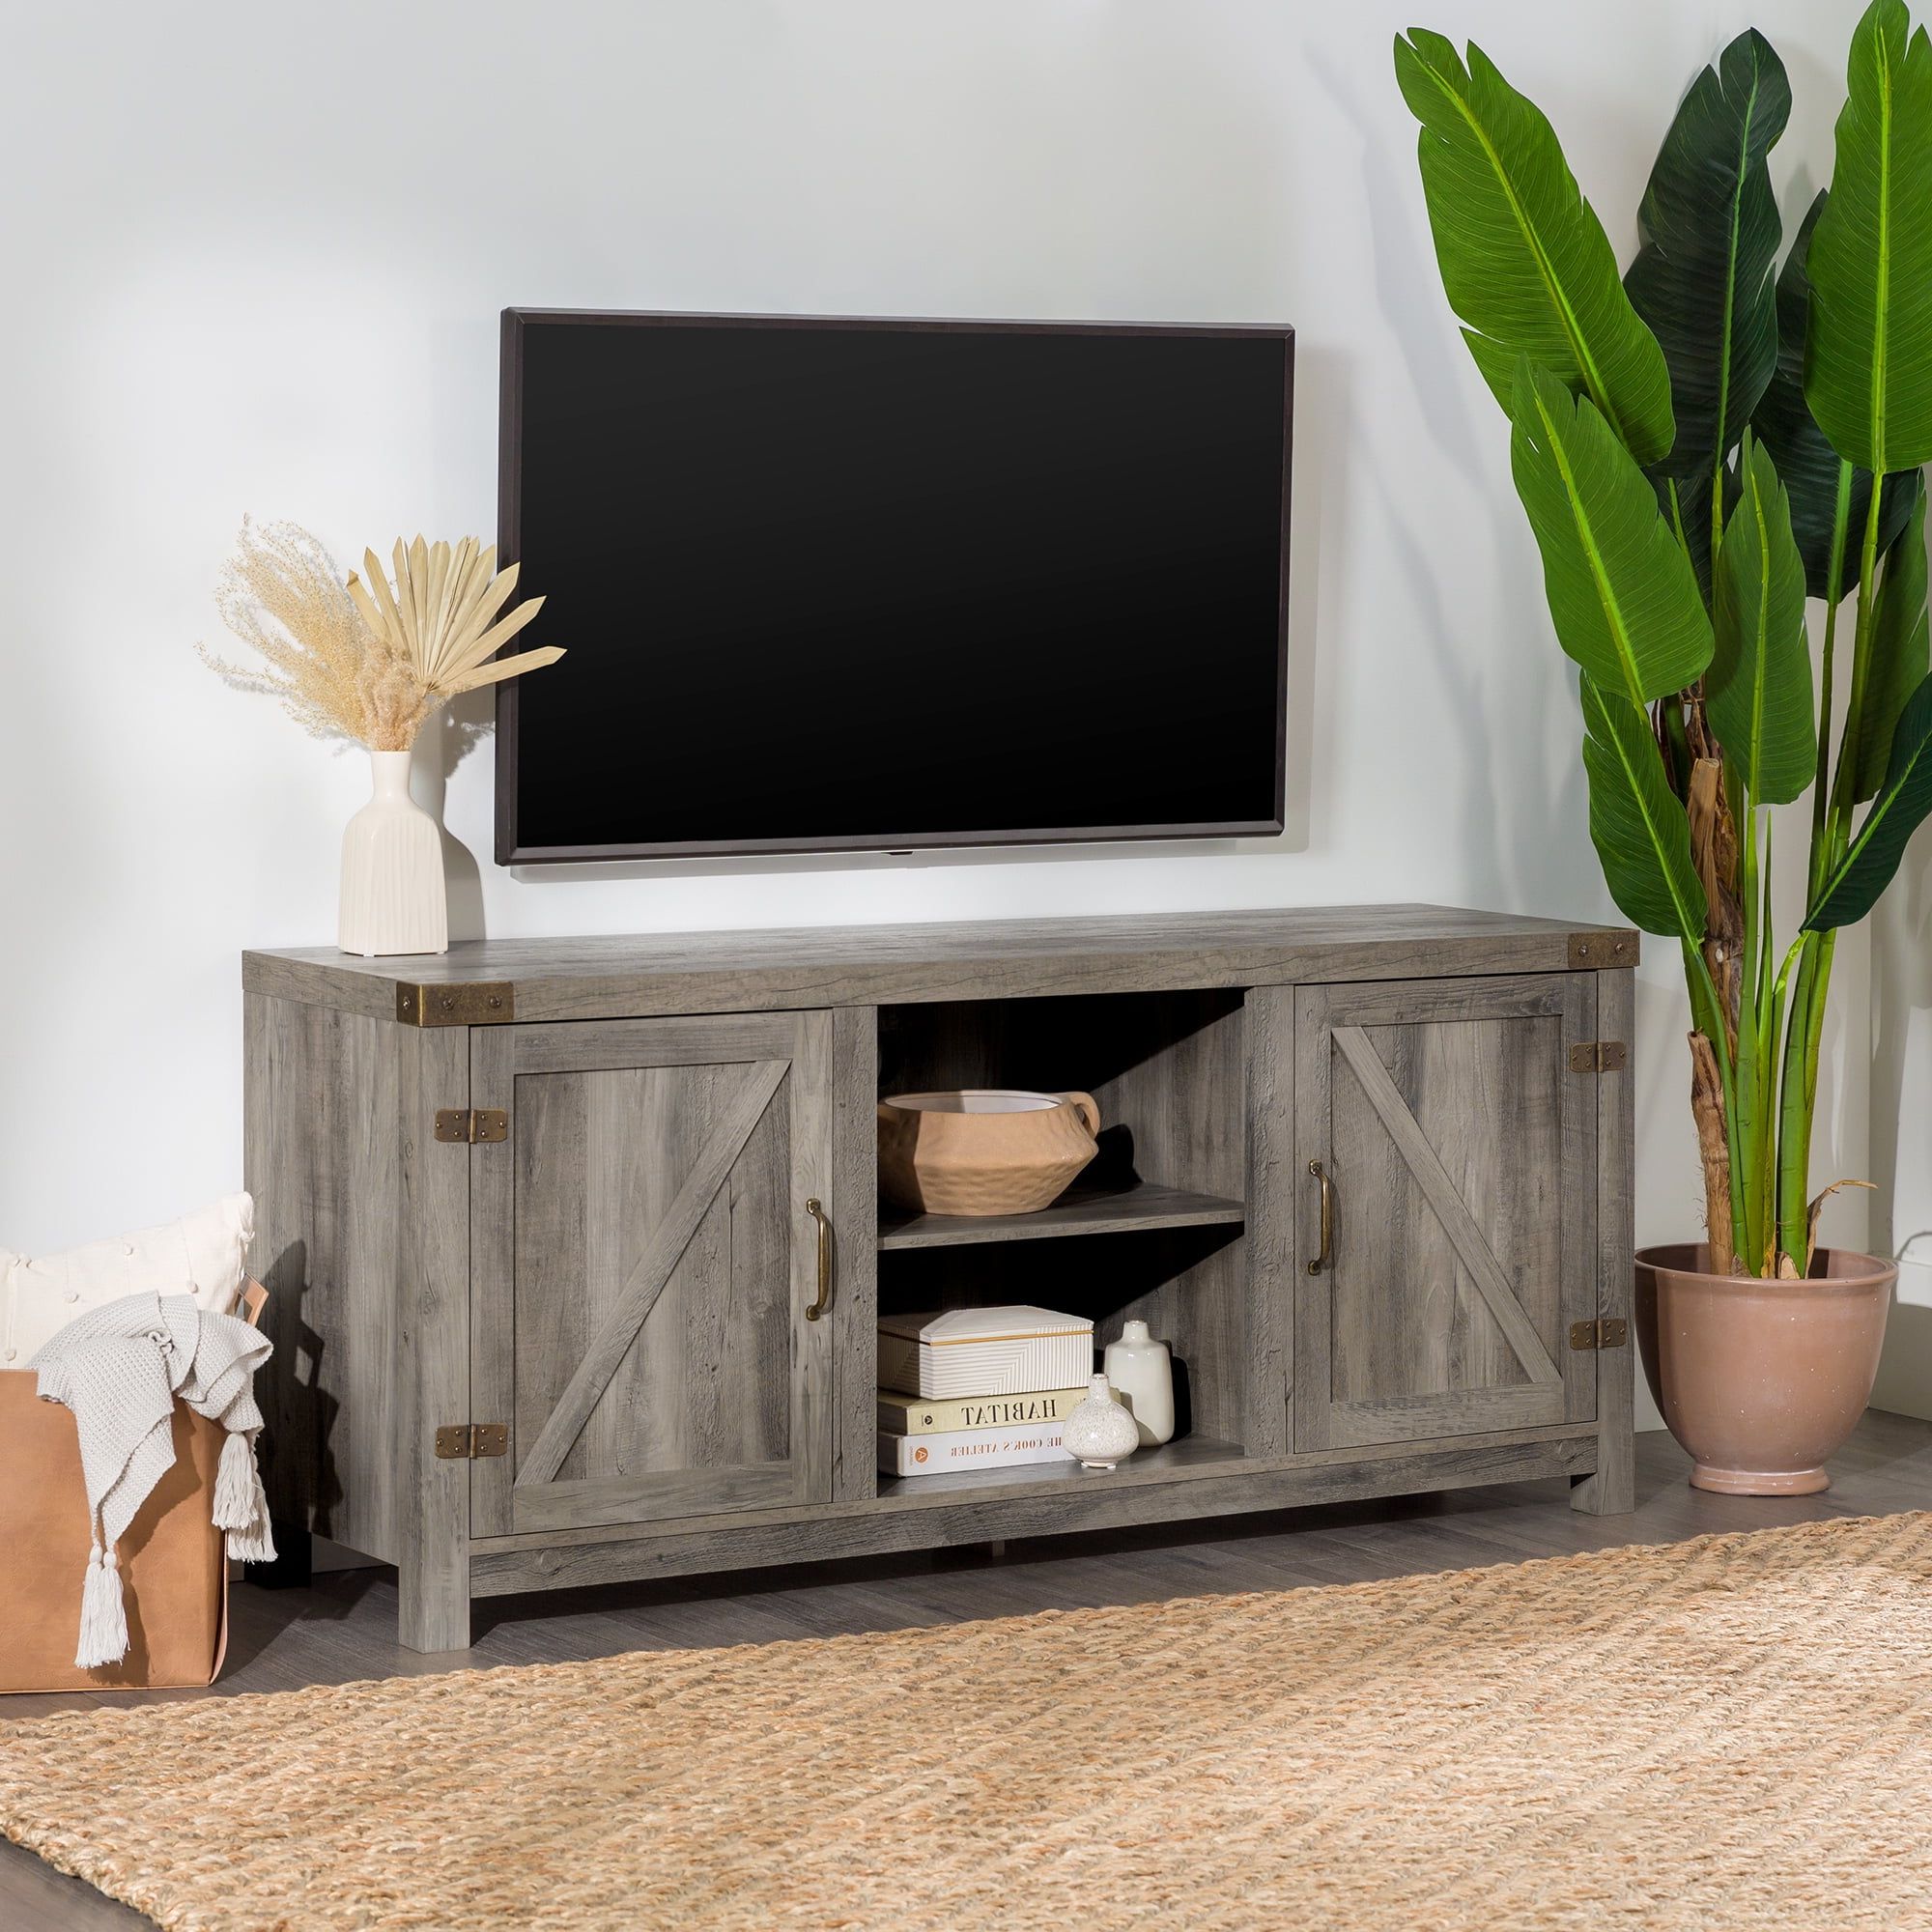 Woven Paths Modern Farmhouse Barn Door Tv Stand For Tvs Up To 65", Grey  Wash – Walmart With Regard To Farmhouse Stands For Tvs (Gallery 4 of 20)